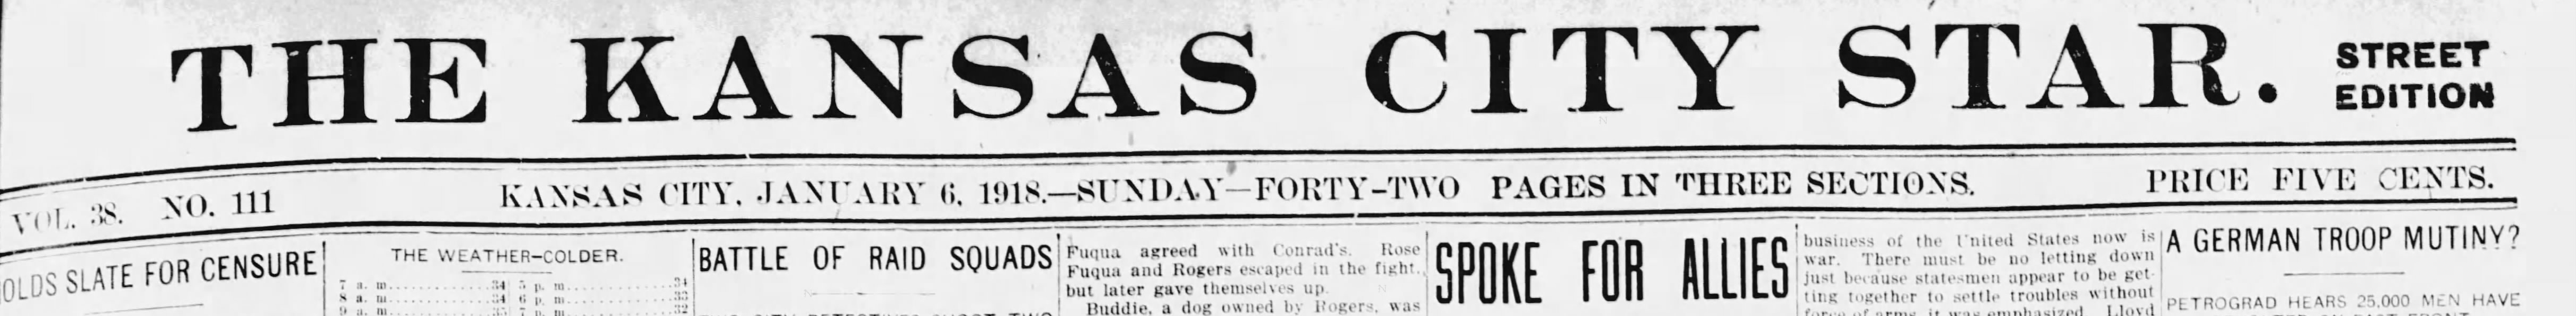 Detail of the masthead and headlines from The Kansas City Star, January 6, 1918.